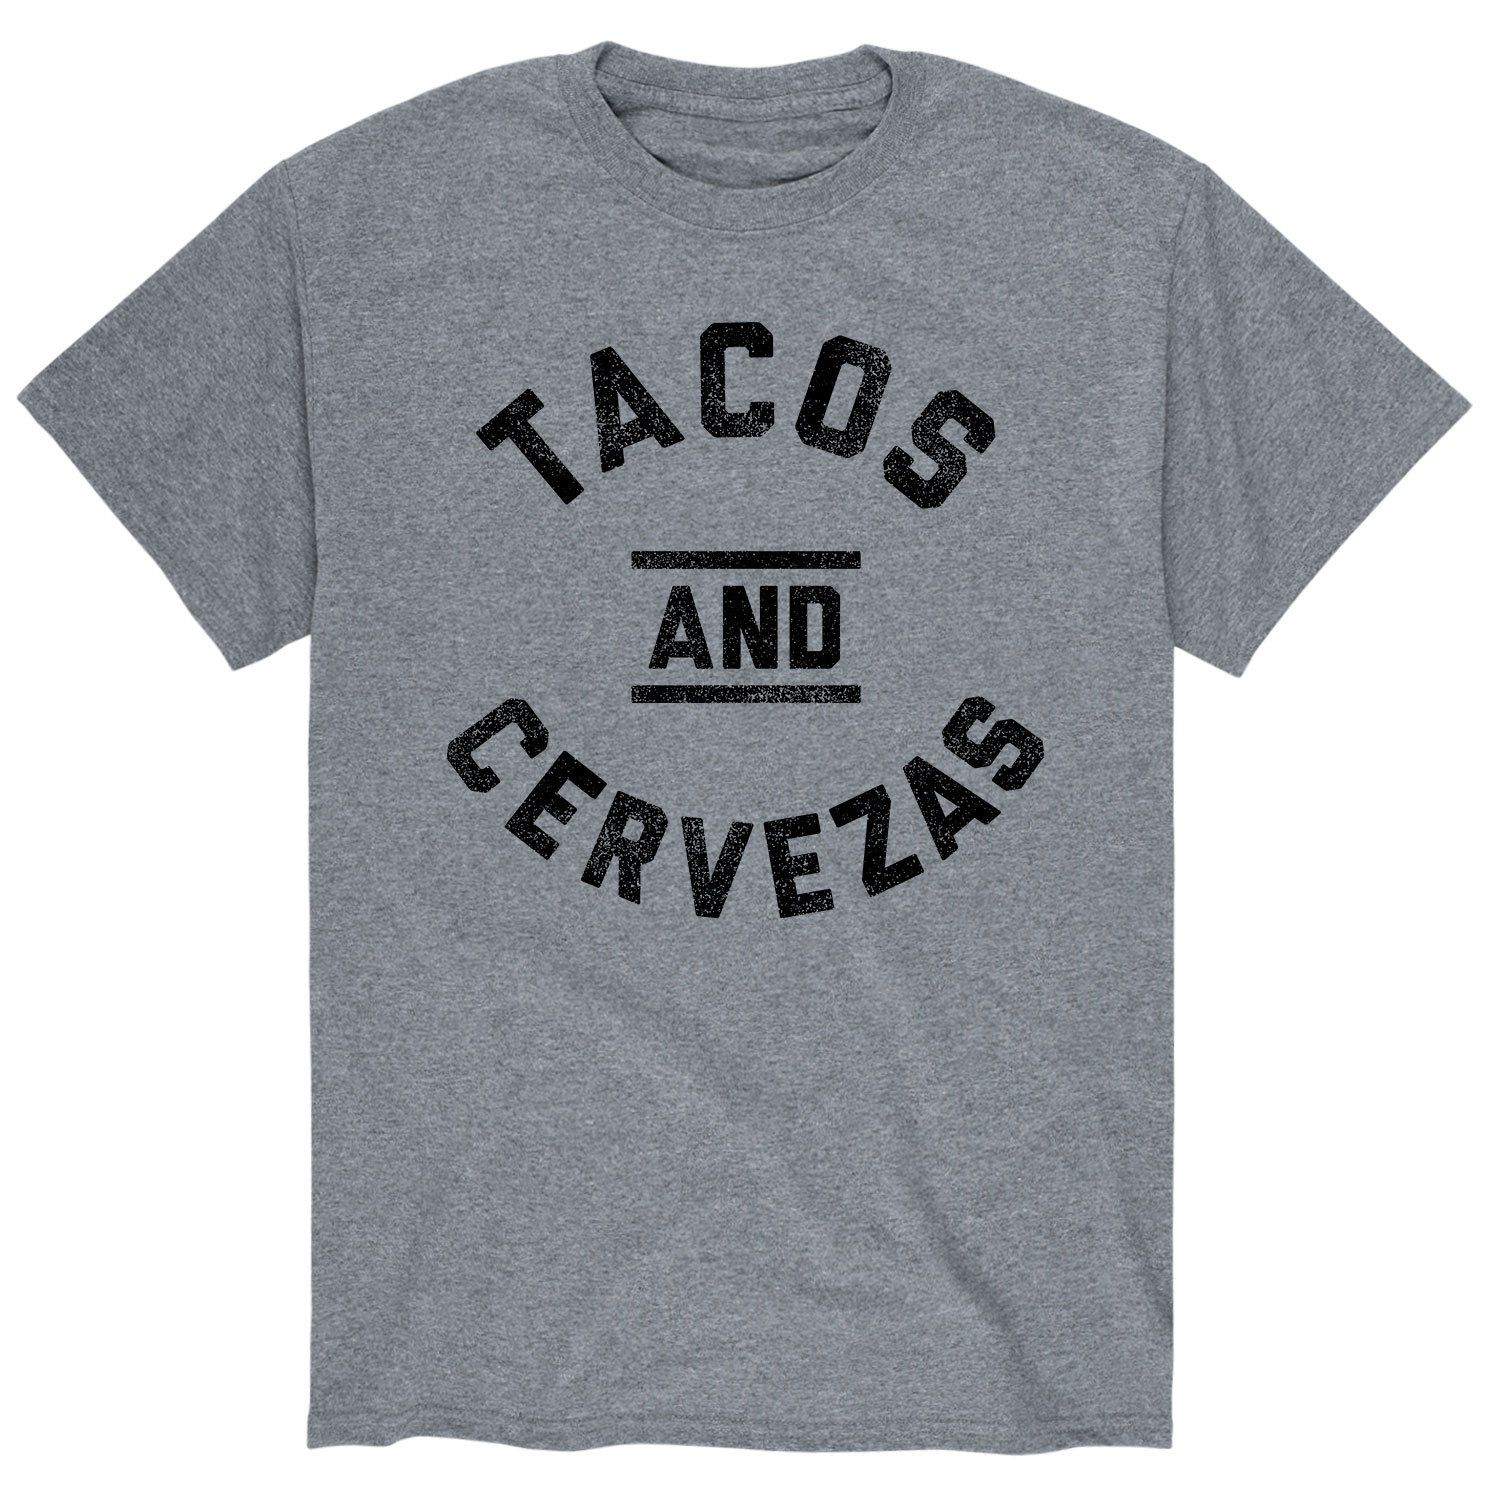 Мужская футболка Tacos And Cervezas Licensed Character